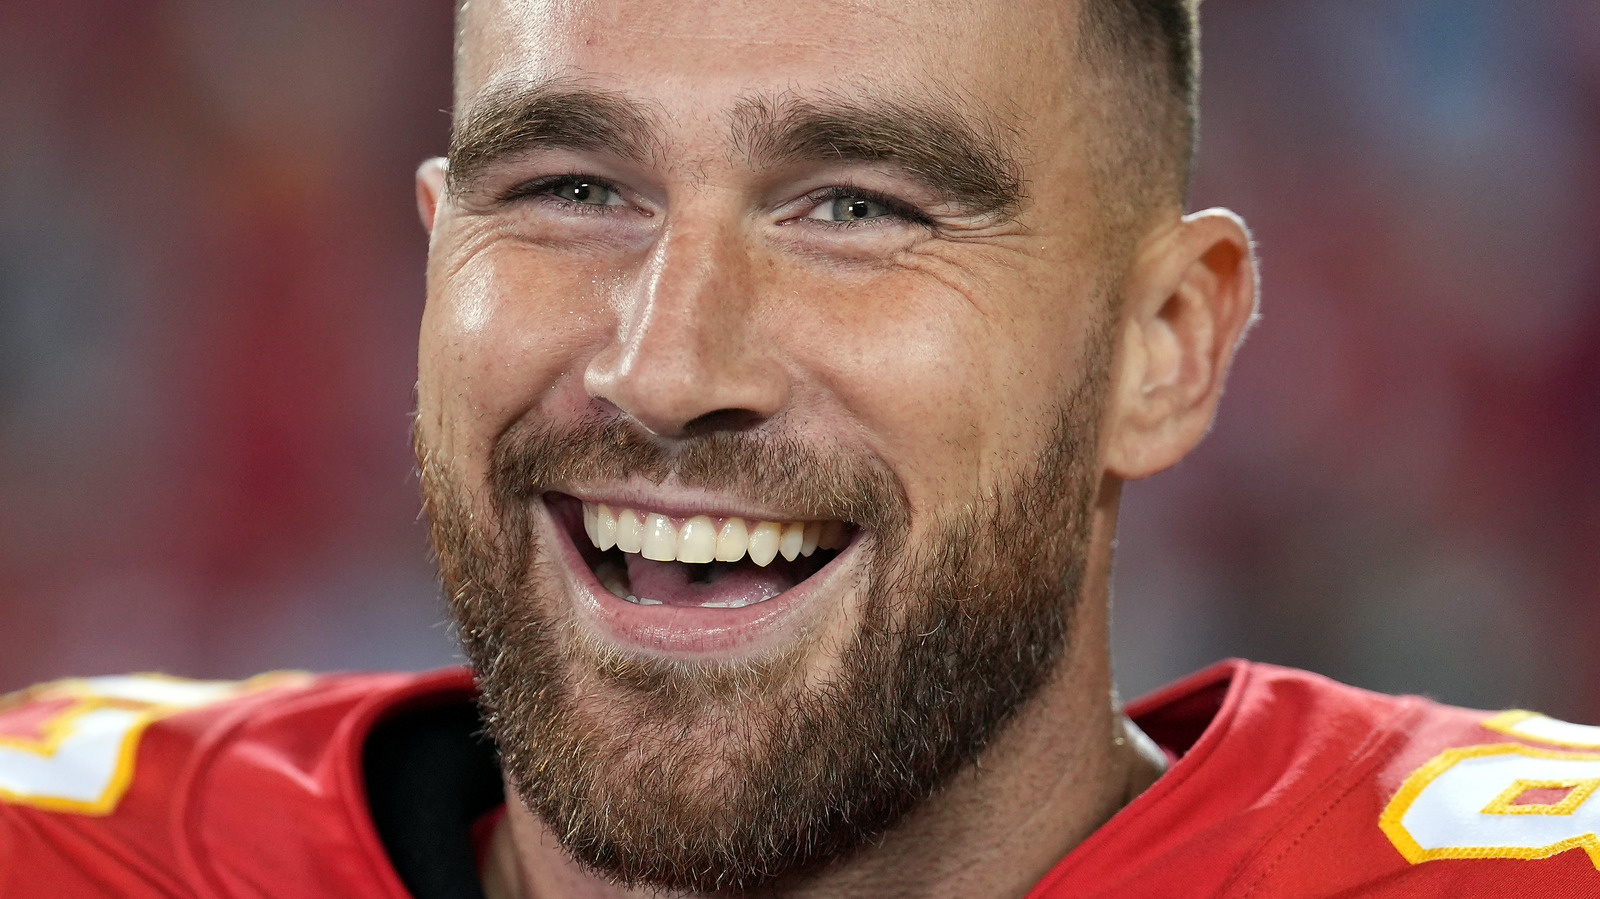 10 Things You Might Not Know About Football Player Travis Kelce